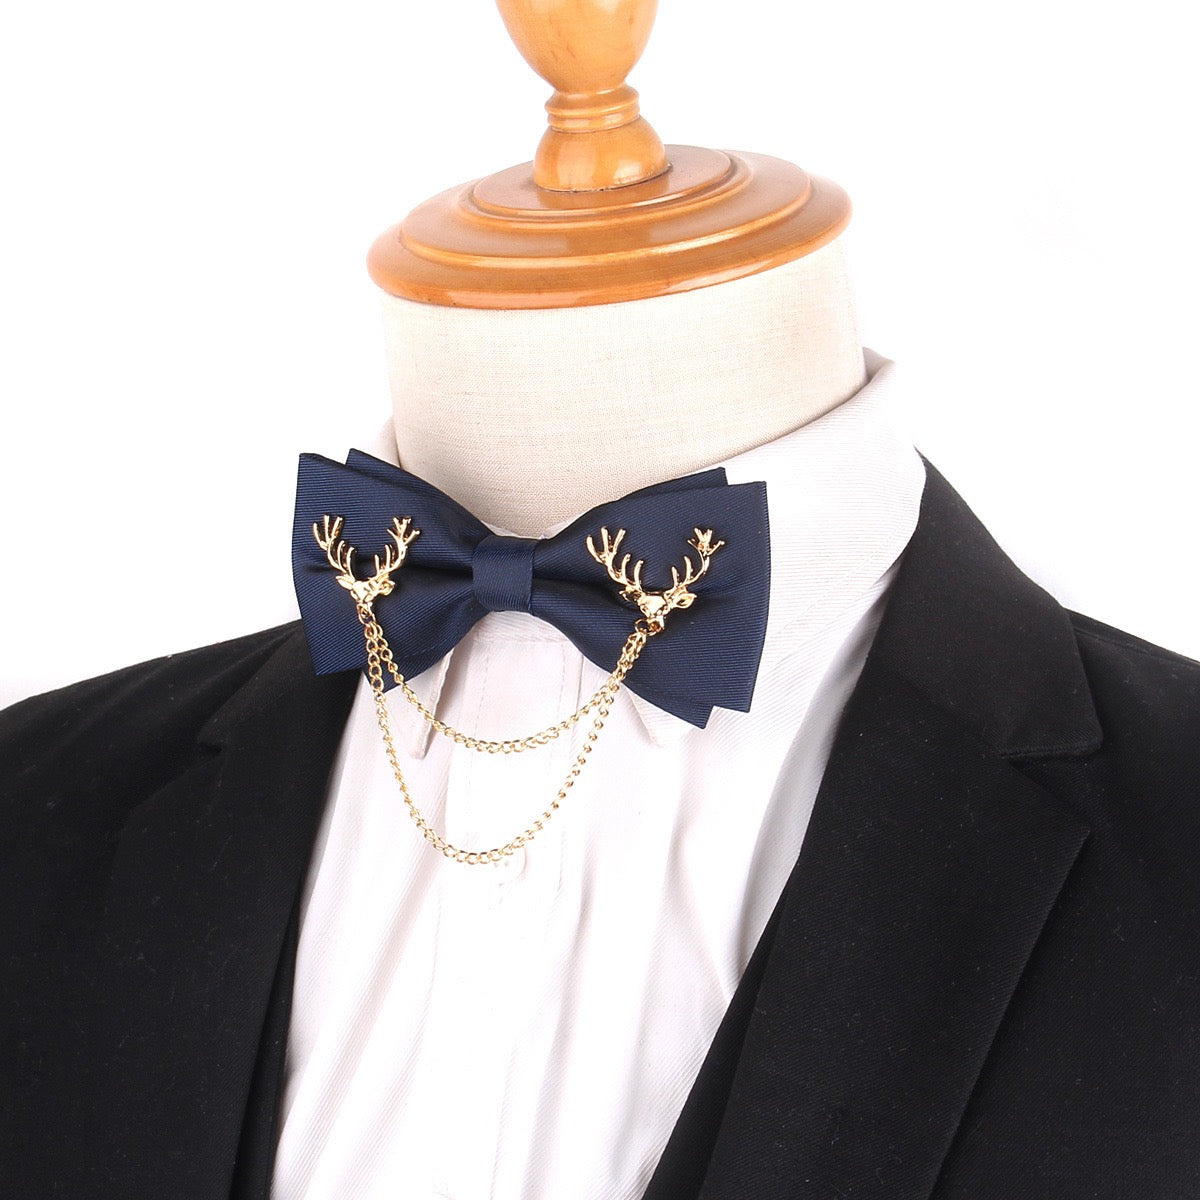 Handmade Men's Business and Formal Bow Tie